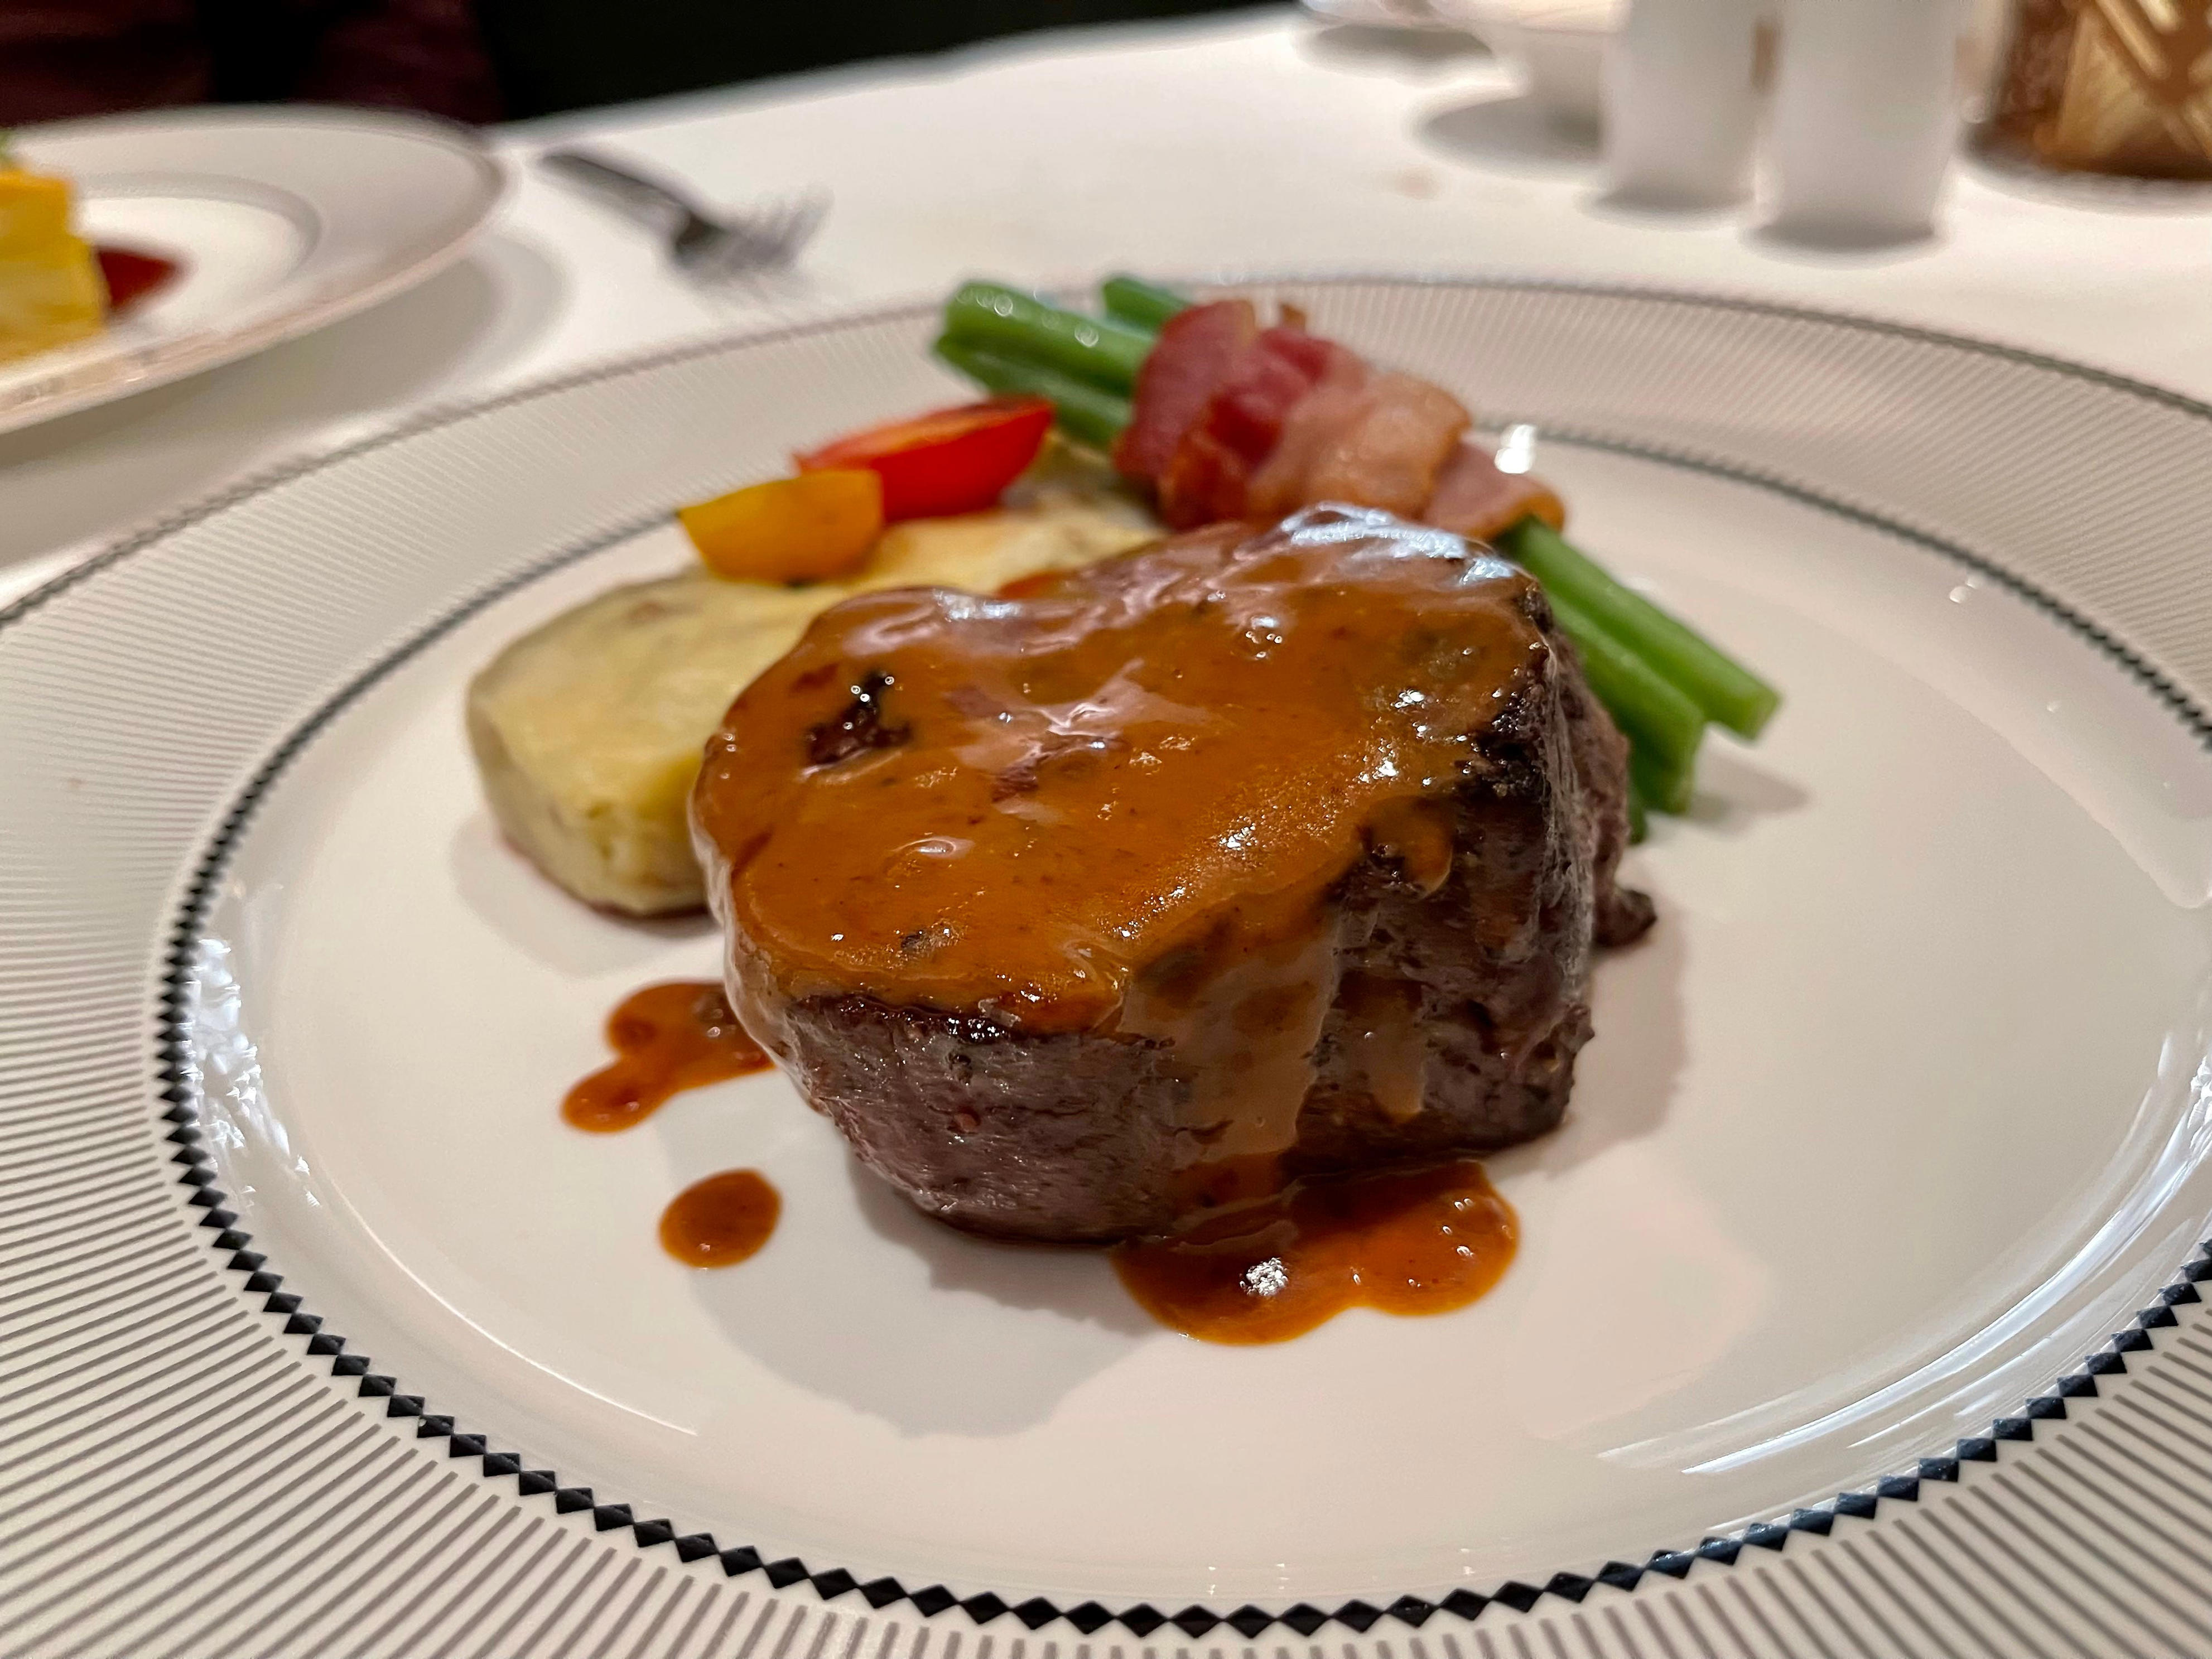 <p>Food is a big factor in deciding where I vacation, and unfortunately, I've found the meals to be largely underwhelming across most major cruise lines.</p><p>But from poolside bites to sit-down meals, I've found the food quality on Disney and Royal Caribbean to be better than what I've found at competitors.</p><p>I also love the variety of food offerings, like Disney's 24-hour room service, which includes Mickey ice cream bars.</p><p>Disney's theming is also excellent and extends to its dining spaces. For example, certain ships have an animation<strong>-</strong>themed restaurant and an immersive-dining show themed to Marvel.</p><p>I've found Royal Caribbean ships to have high-quality buffets and unique cruise offerings. For example, Icon of the Seas has a unique, globally inspired food hall. It also has unique dining experiences, like an Alice in Wonderland-themed, multi-course restaurant on Wonder of the Seas.</p>